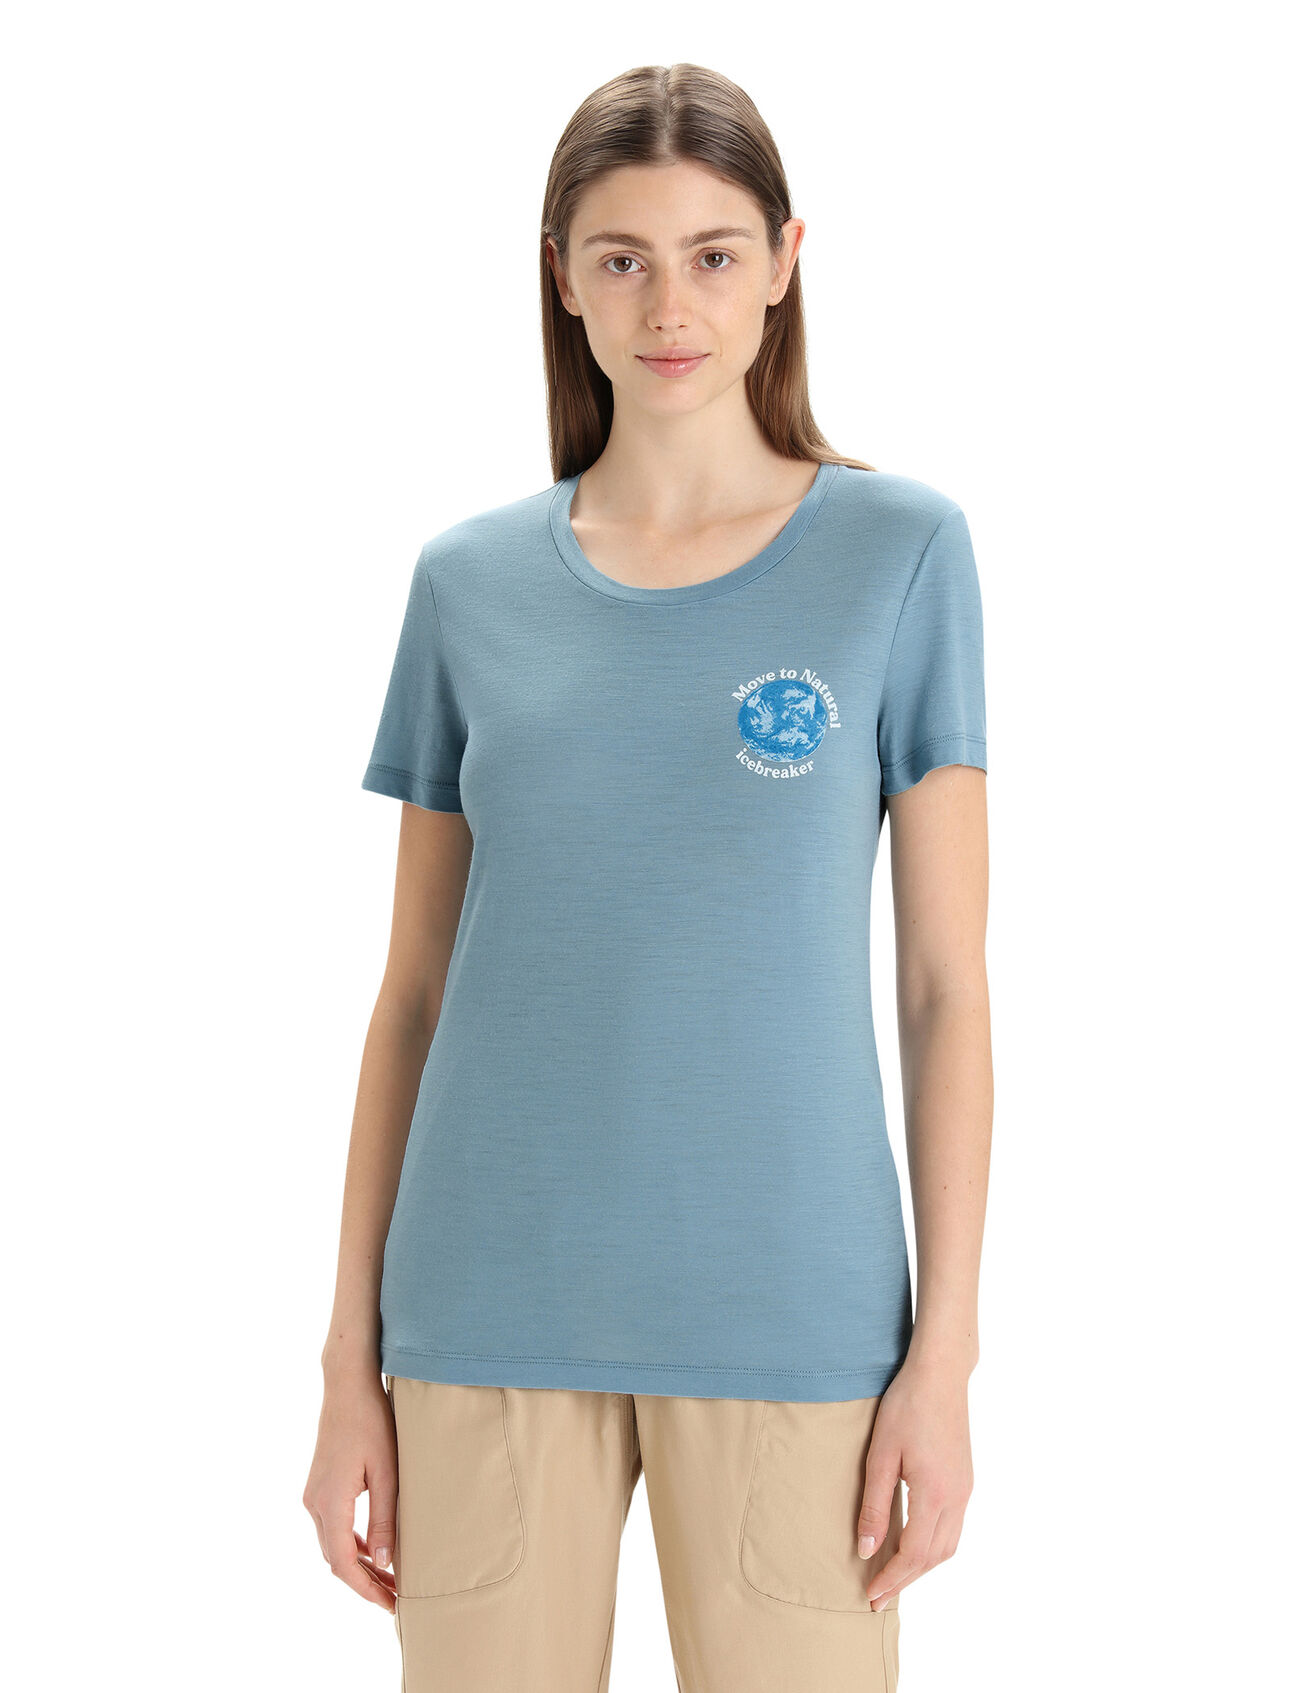 Womens Merino Tech Lite II Short Sleeve T-Shirt icebreaker Earth Our versatile tech tee that provides comfort, breathability and natural odour-resistance for any adventure you can think of, the Tech Lite II Short Sleeve Tee icebreaker Earth features 100% merino for all-natural performance. The original artwork celebrates our home planet and raises awareness about our need for a more natural path.